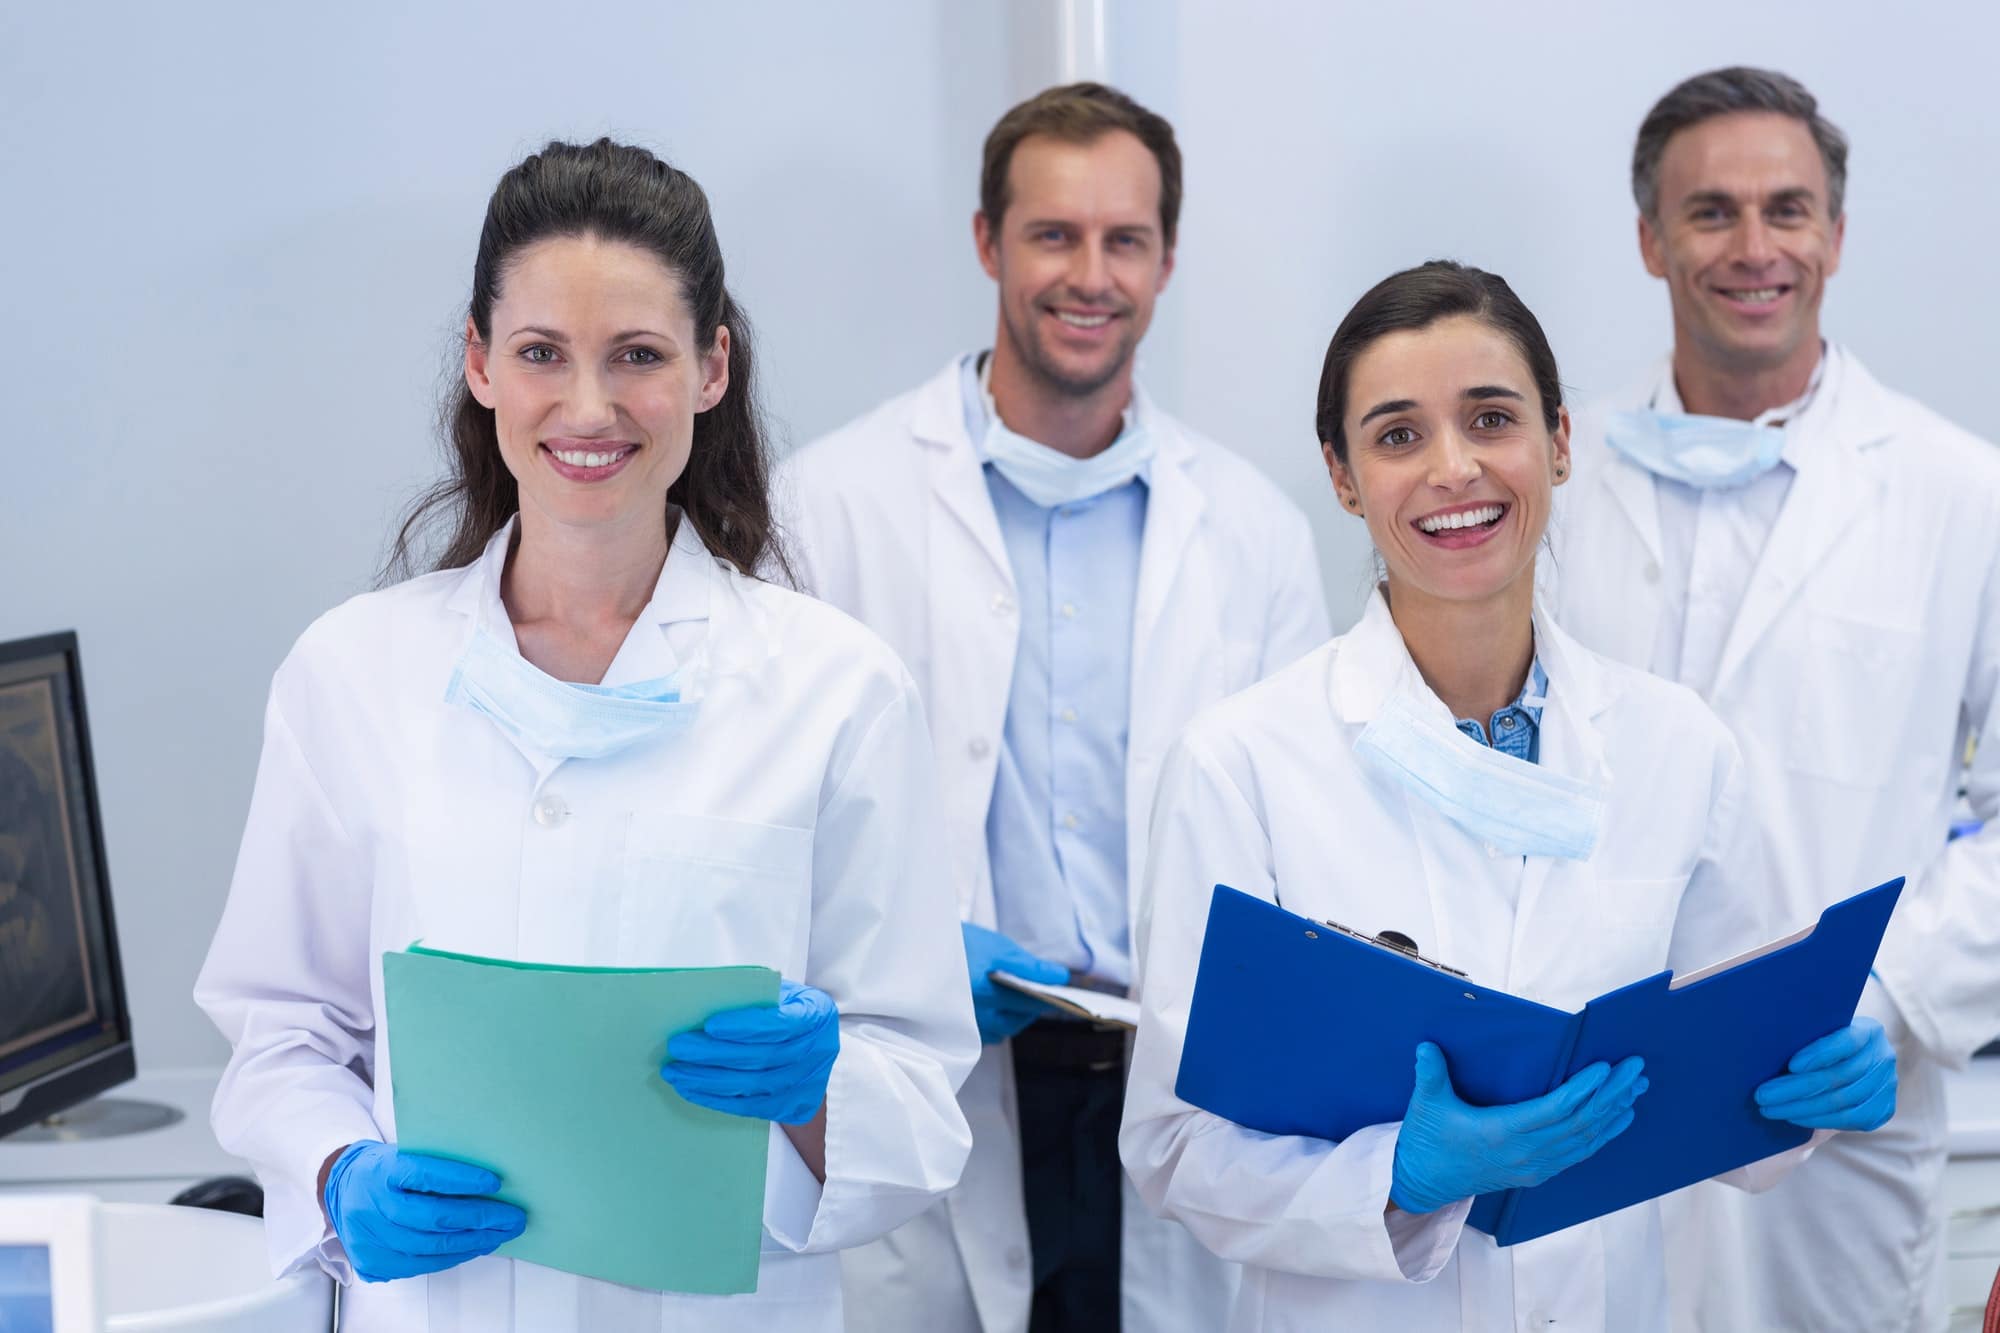 Smiling dentists standing in dental clinic